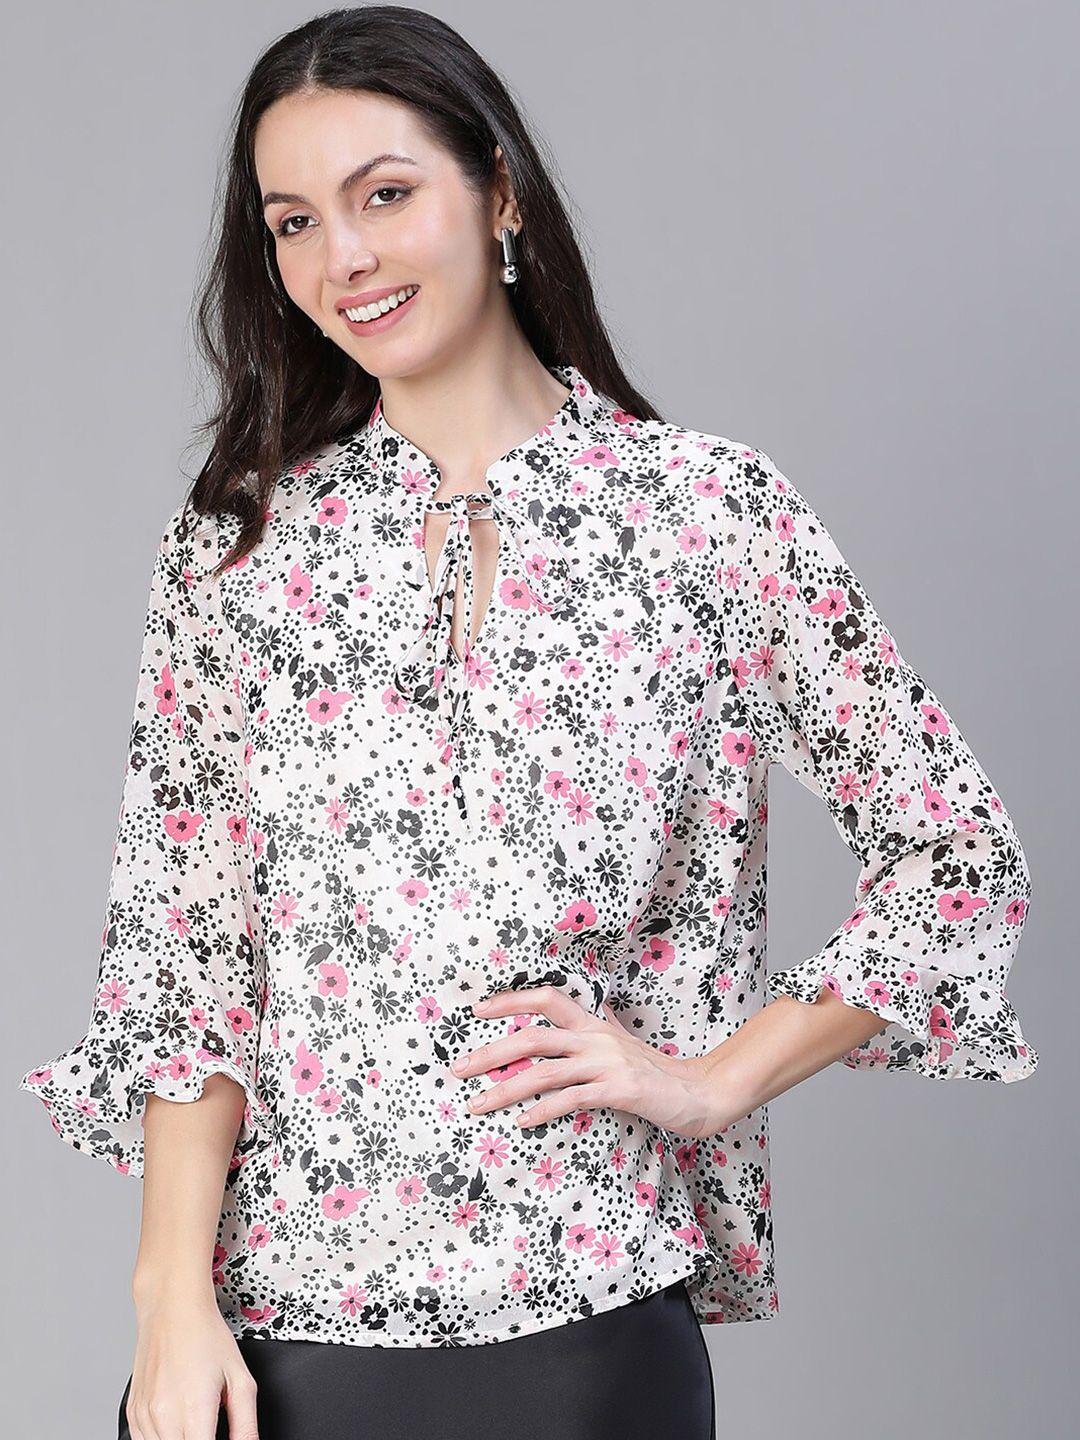 oxolloxo-floral-printed-tie-up-neck-georgette-top